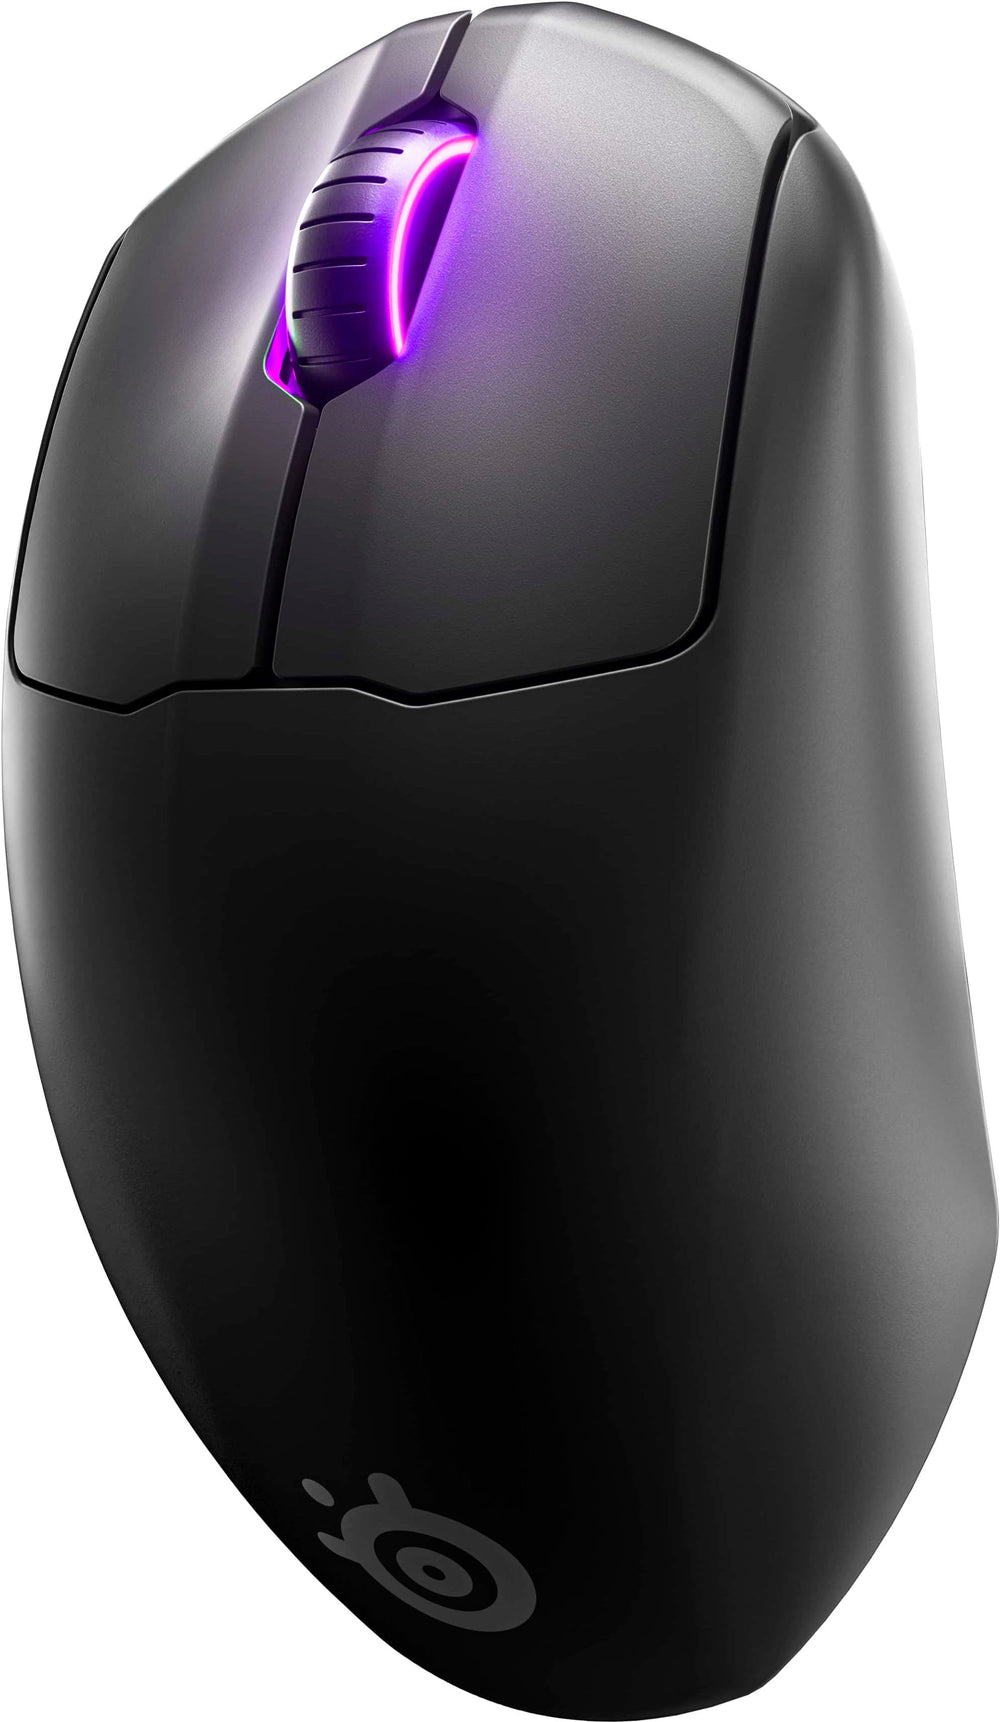 SteelSeries - Prime Esport Mini Lightweight Wireless Optical Gaming Mouse With Over 100 Hour Battery Life - Black_1